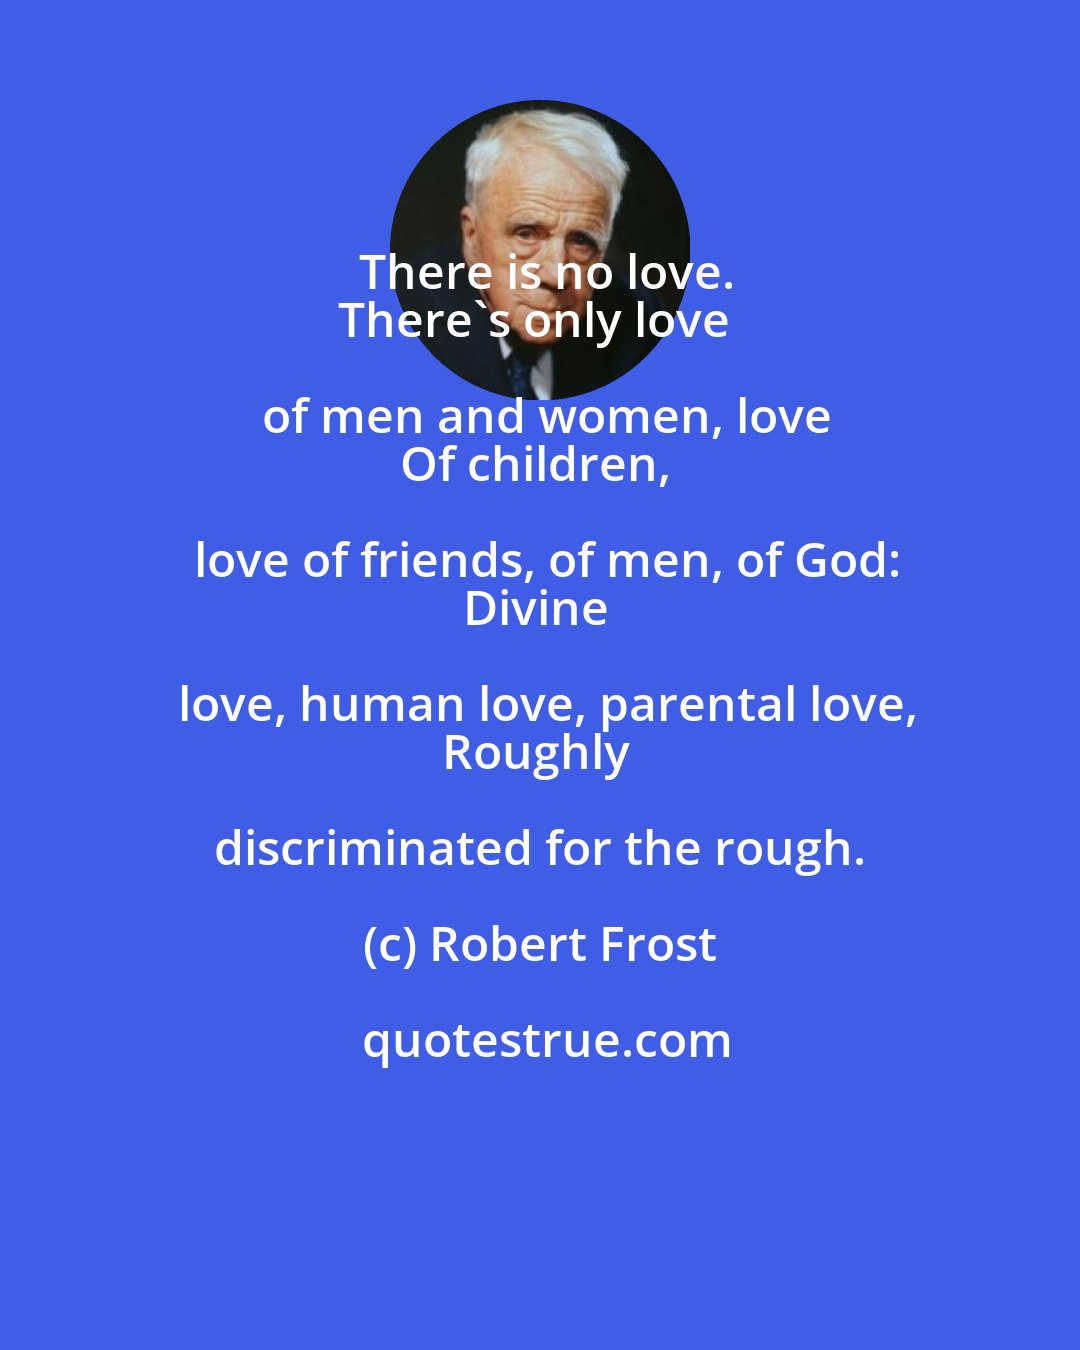 Robert Frost: There is no love.
There's only love of men and women, love
Of children, love of friends, of men, of God:
Divine love, human love, parental love,
Roughly discriminated for the rough.